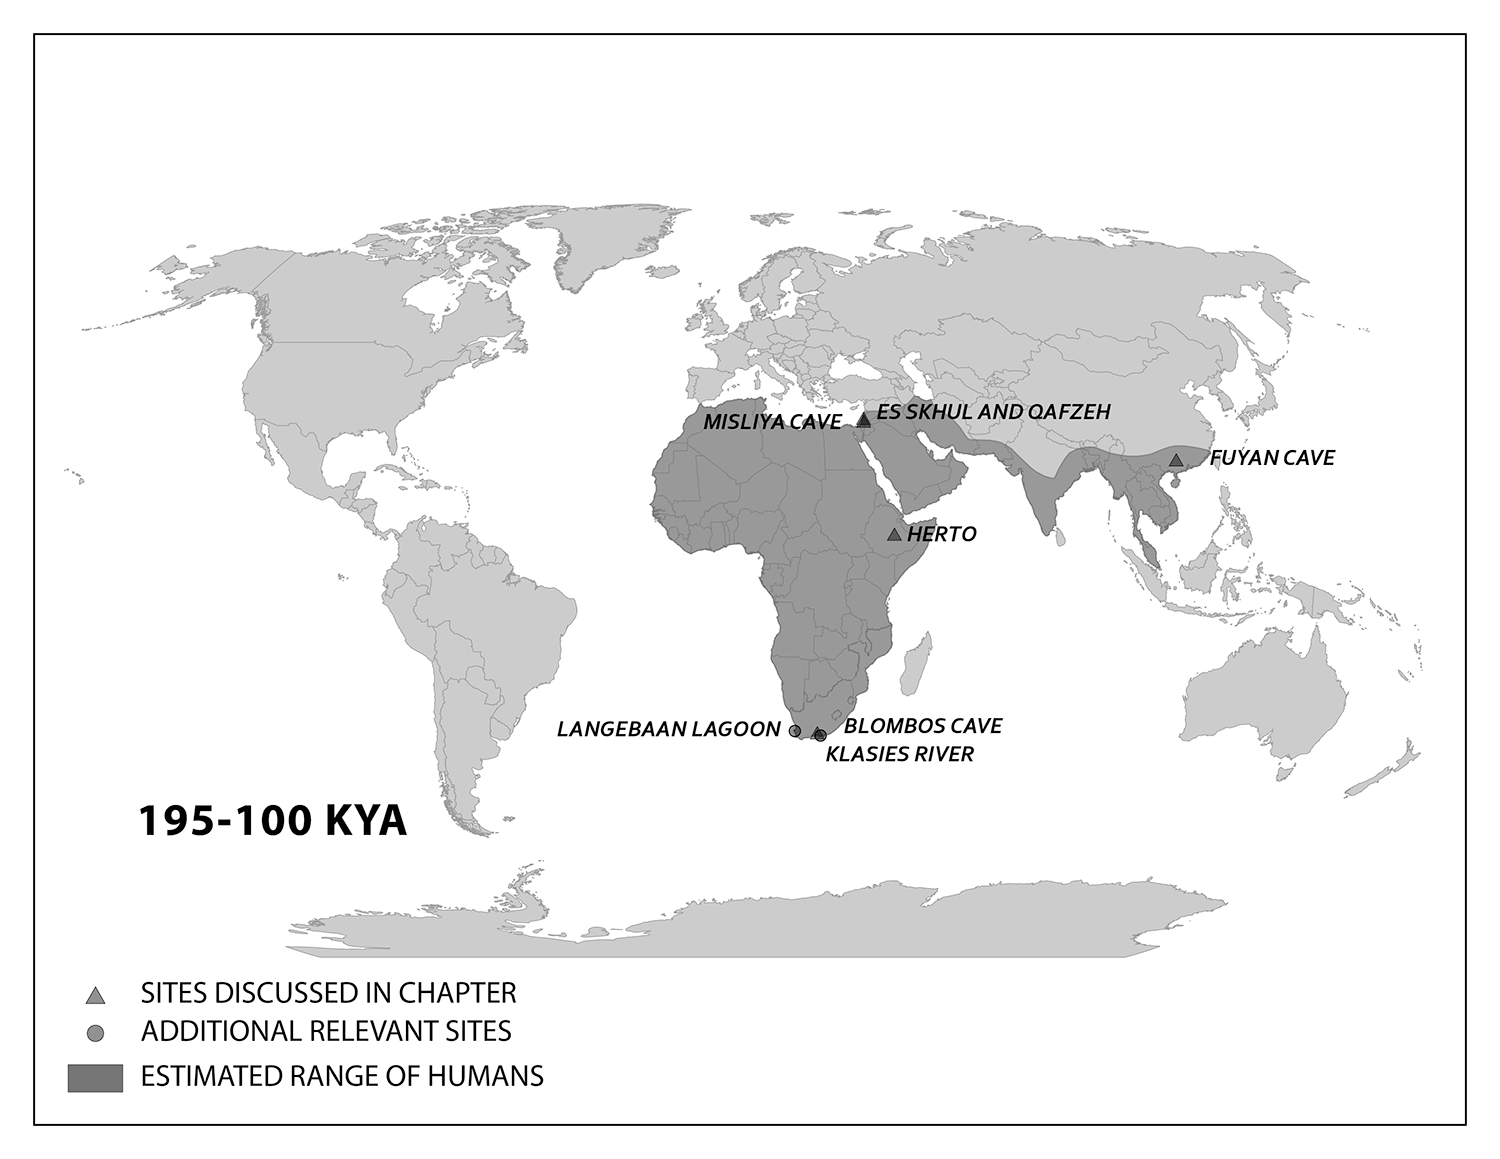 195-100 KYA. Africa, southern Europe and Asia are shaded